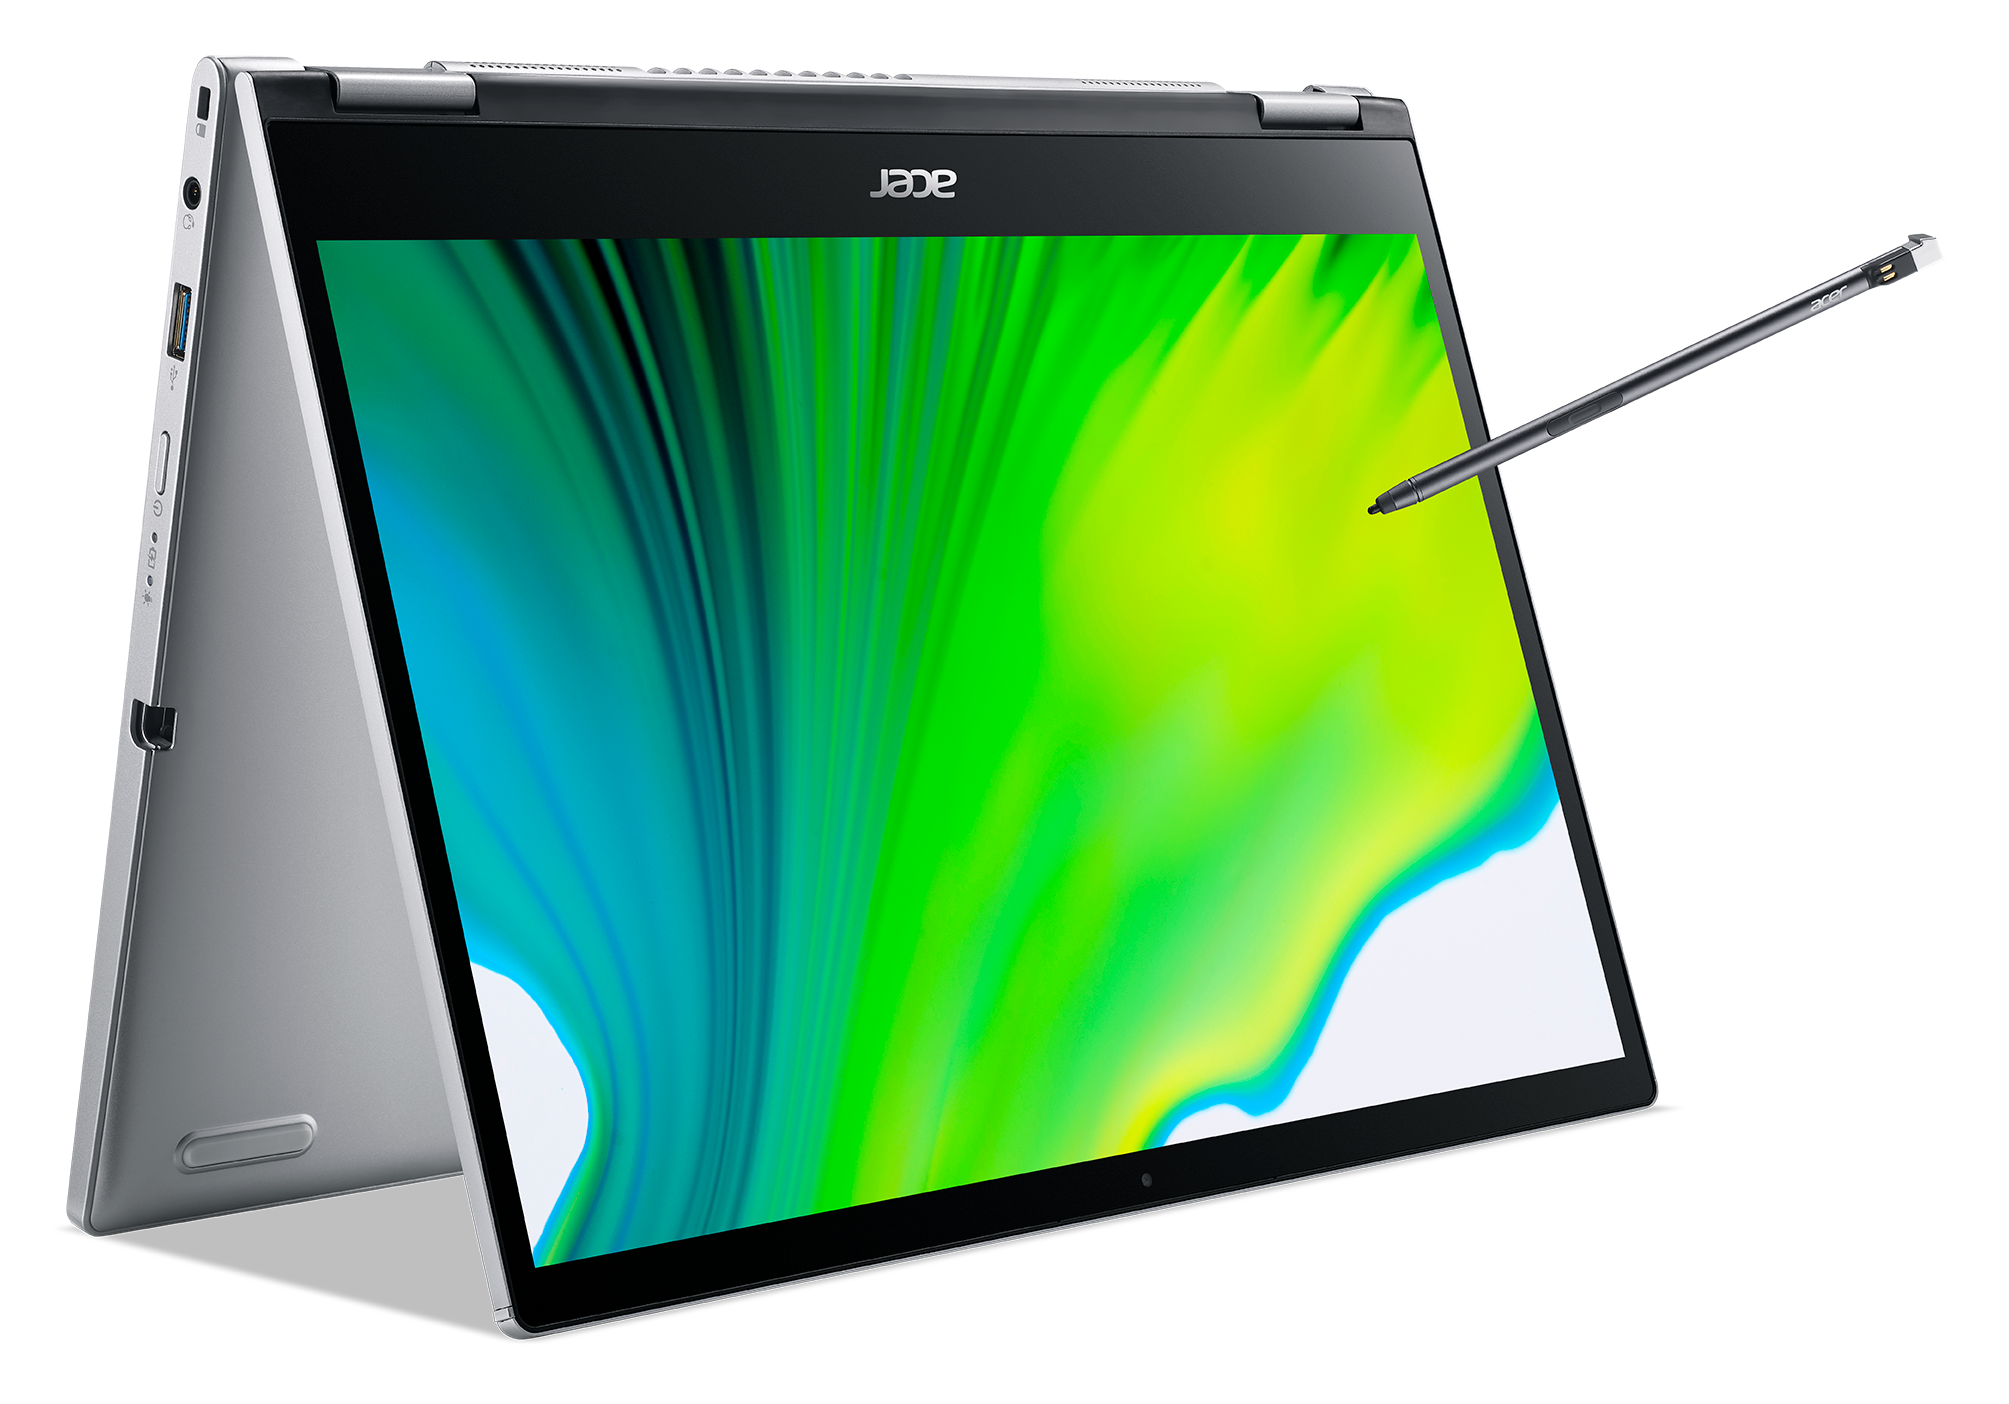 The new Acer Spin 3